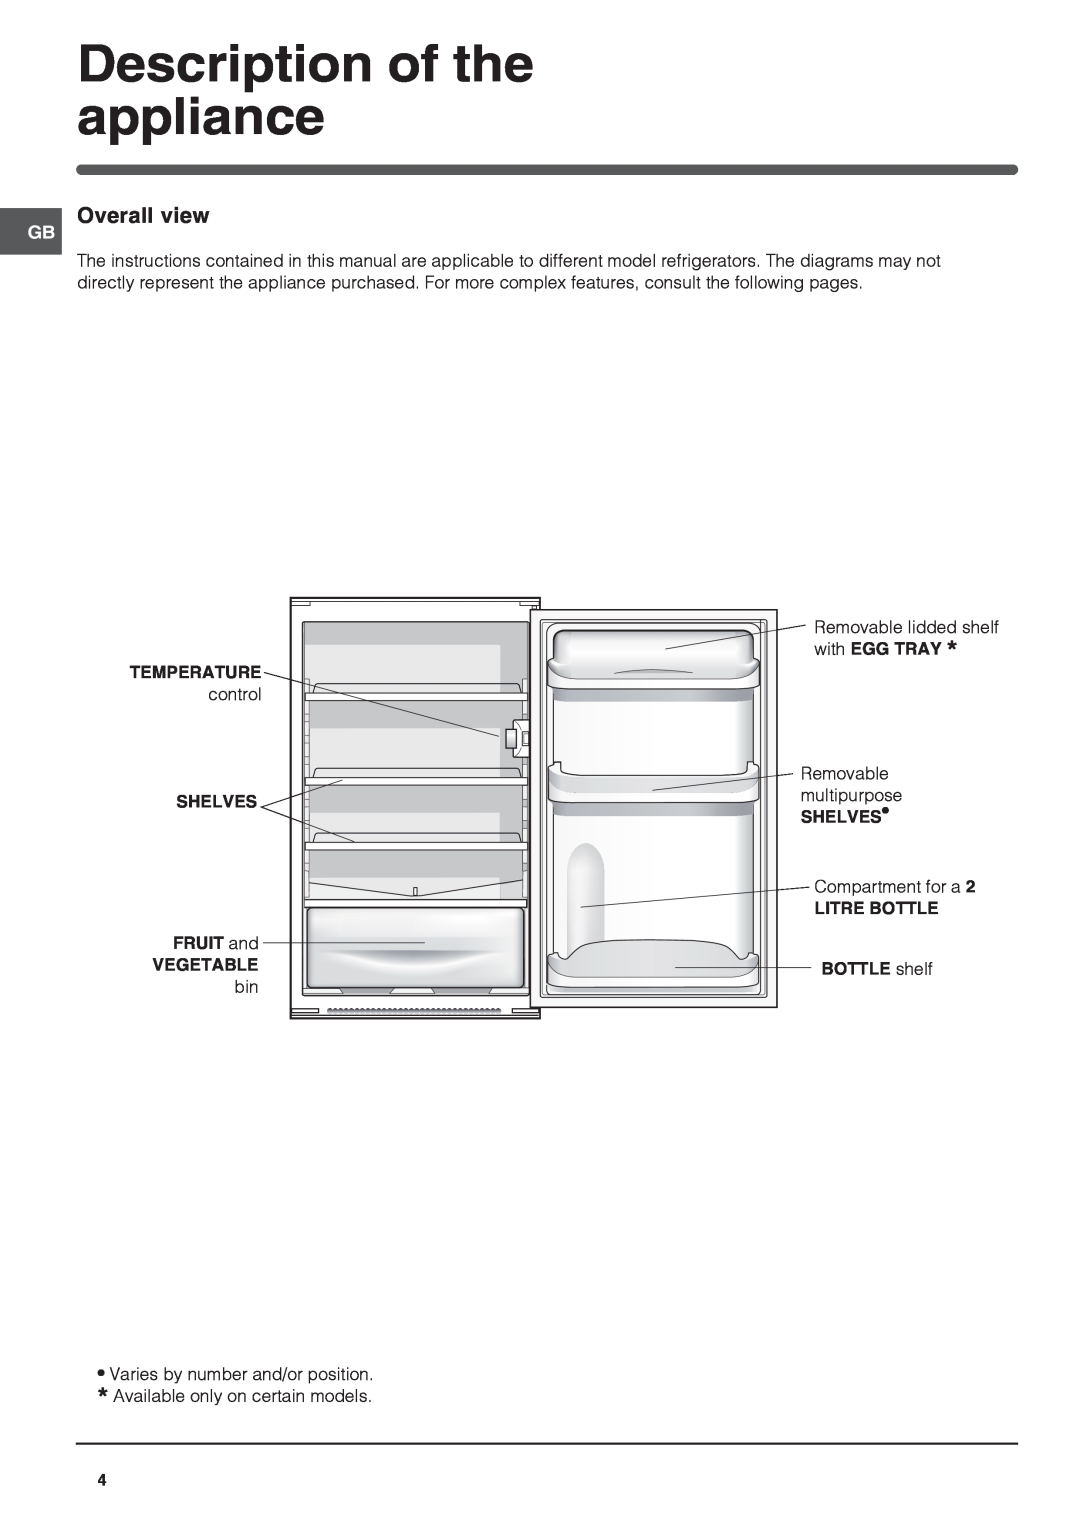 Xerox HS1621 manual Description of the appliance, Overall view 